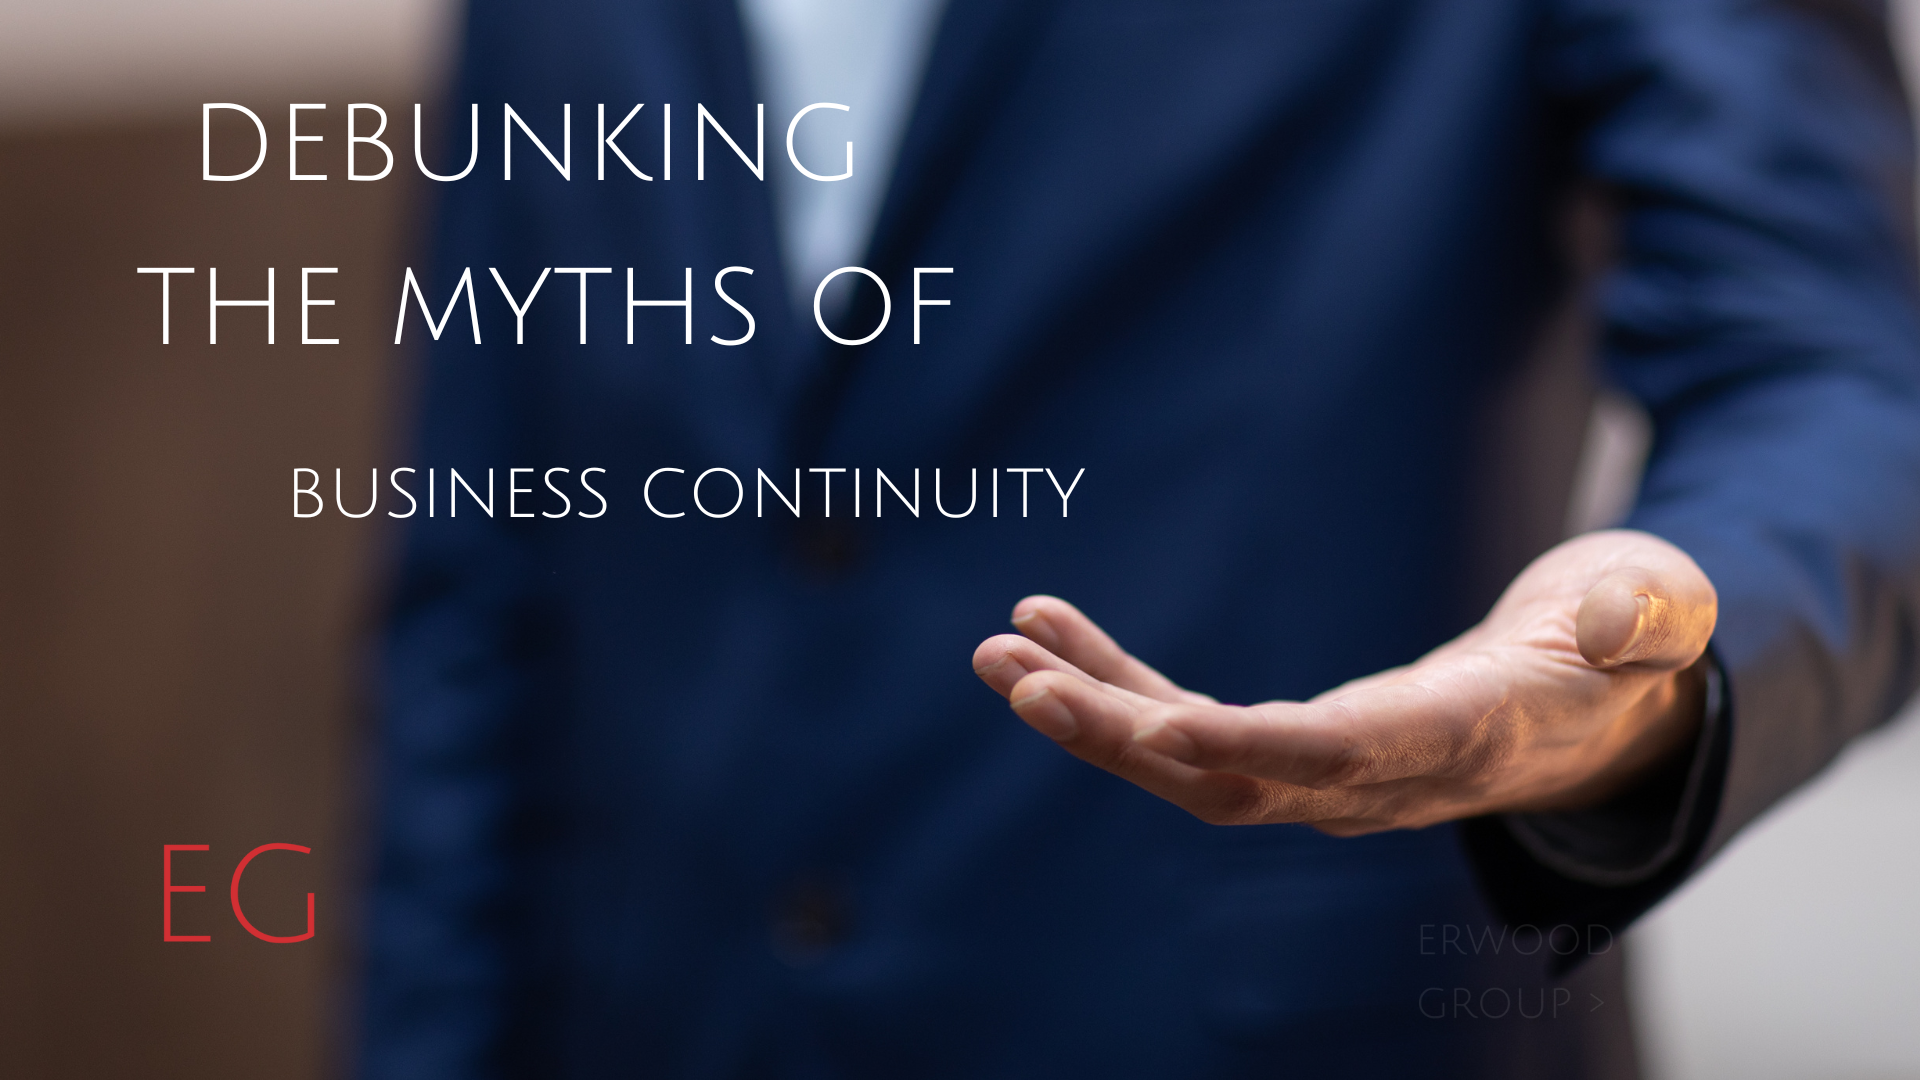 Debunking the Myths of Business Continuity